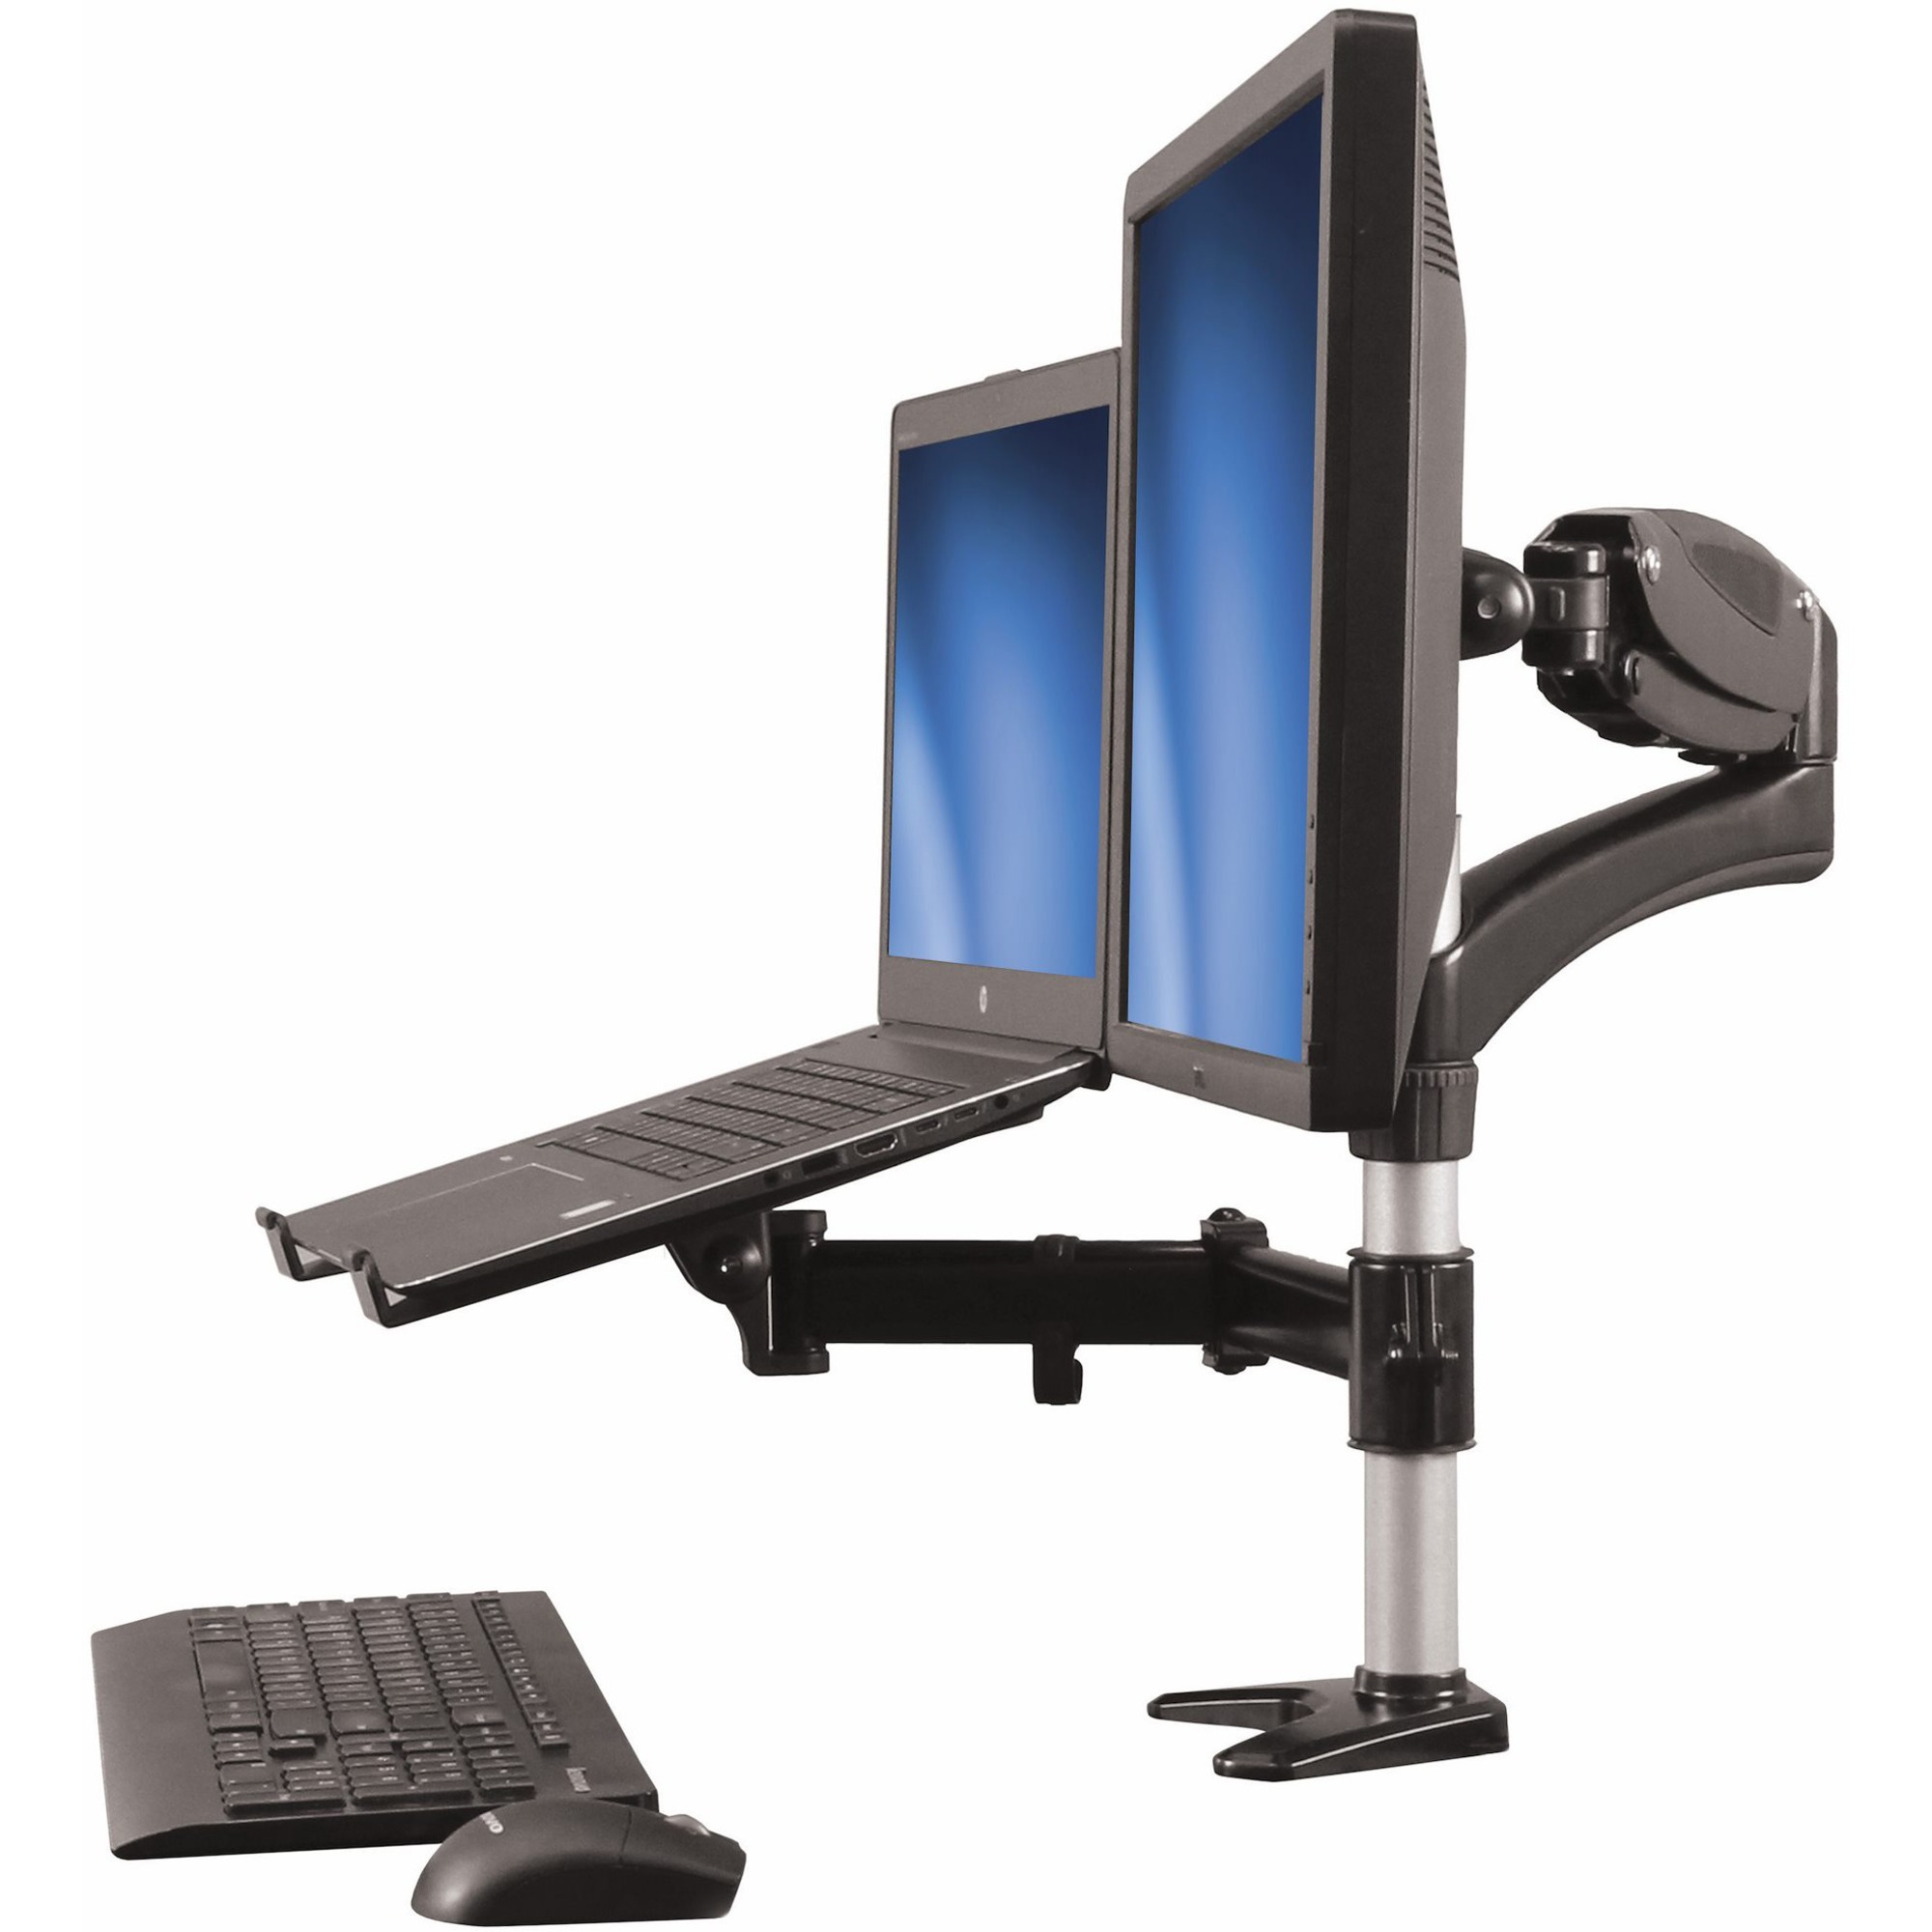 StarTech.com Laptop Monitor Stand - Computer Monitor Stand - Full Motion  Articulating - VESA Mount Monitor Desk Mount - 1 Displays Supported68.6 cm  Screen Support - ARMUNONB